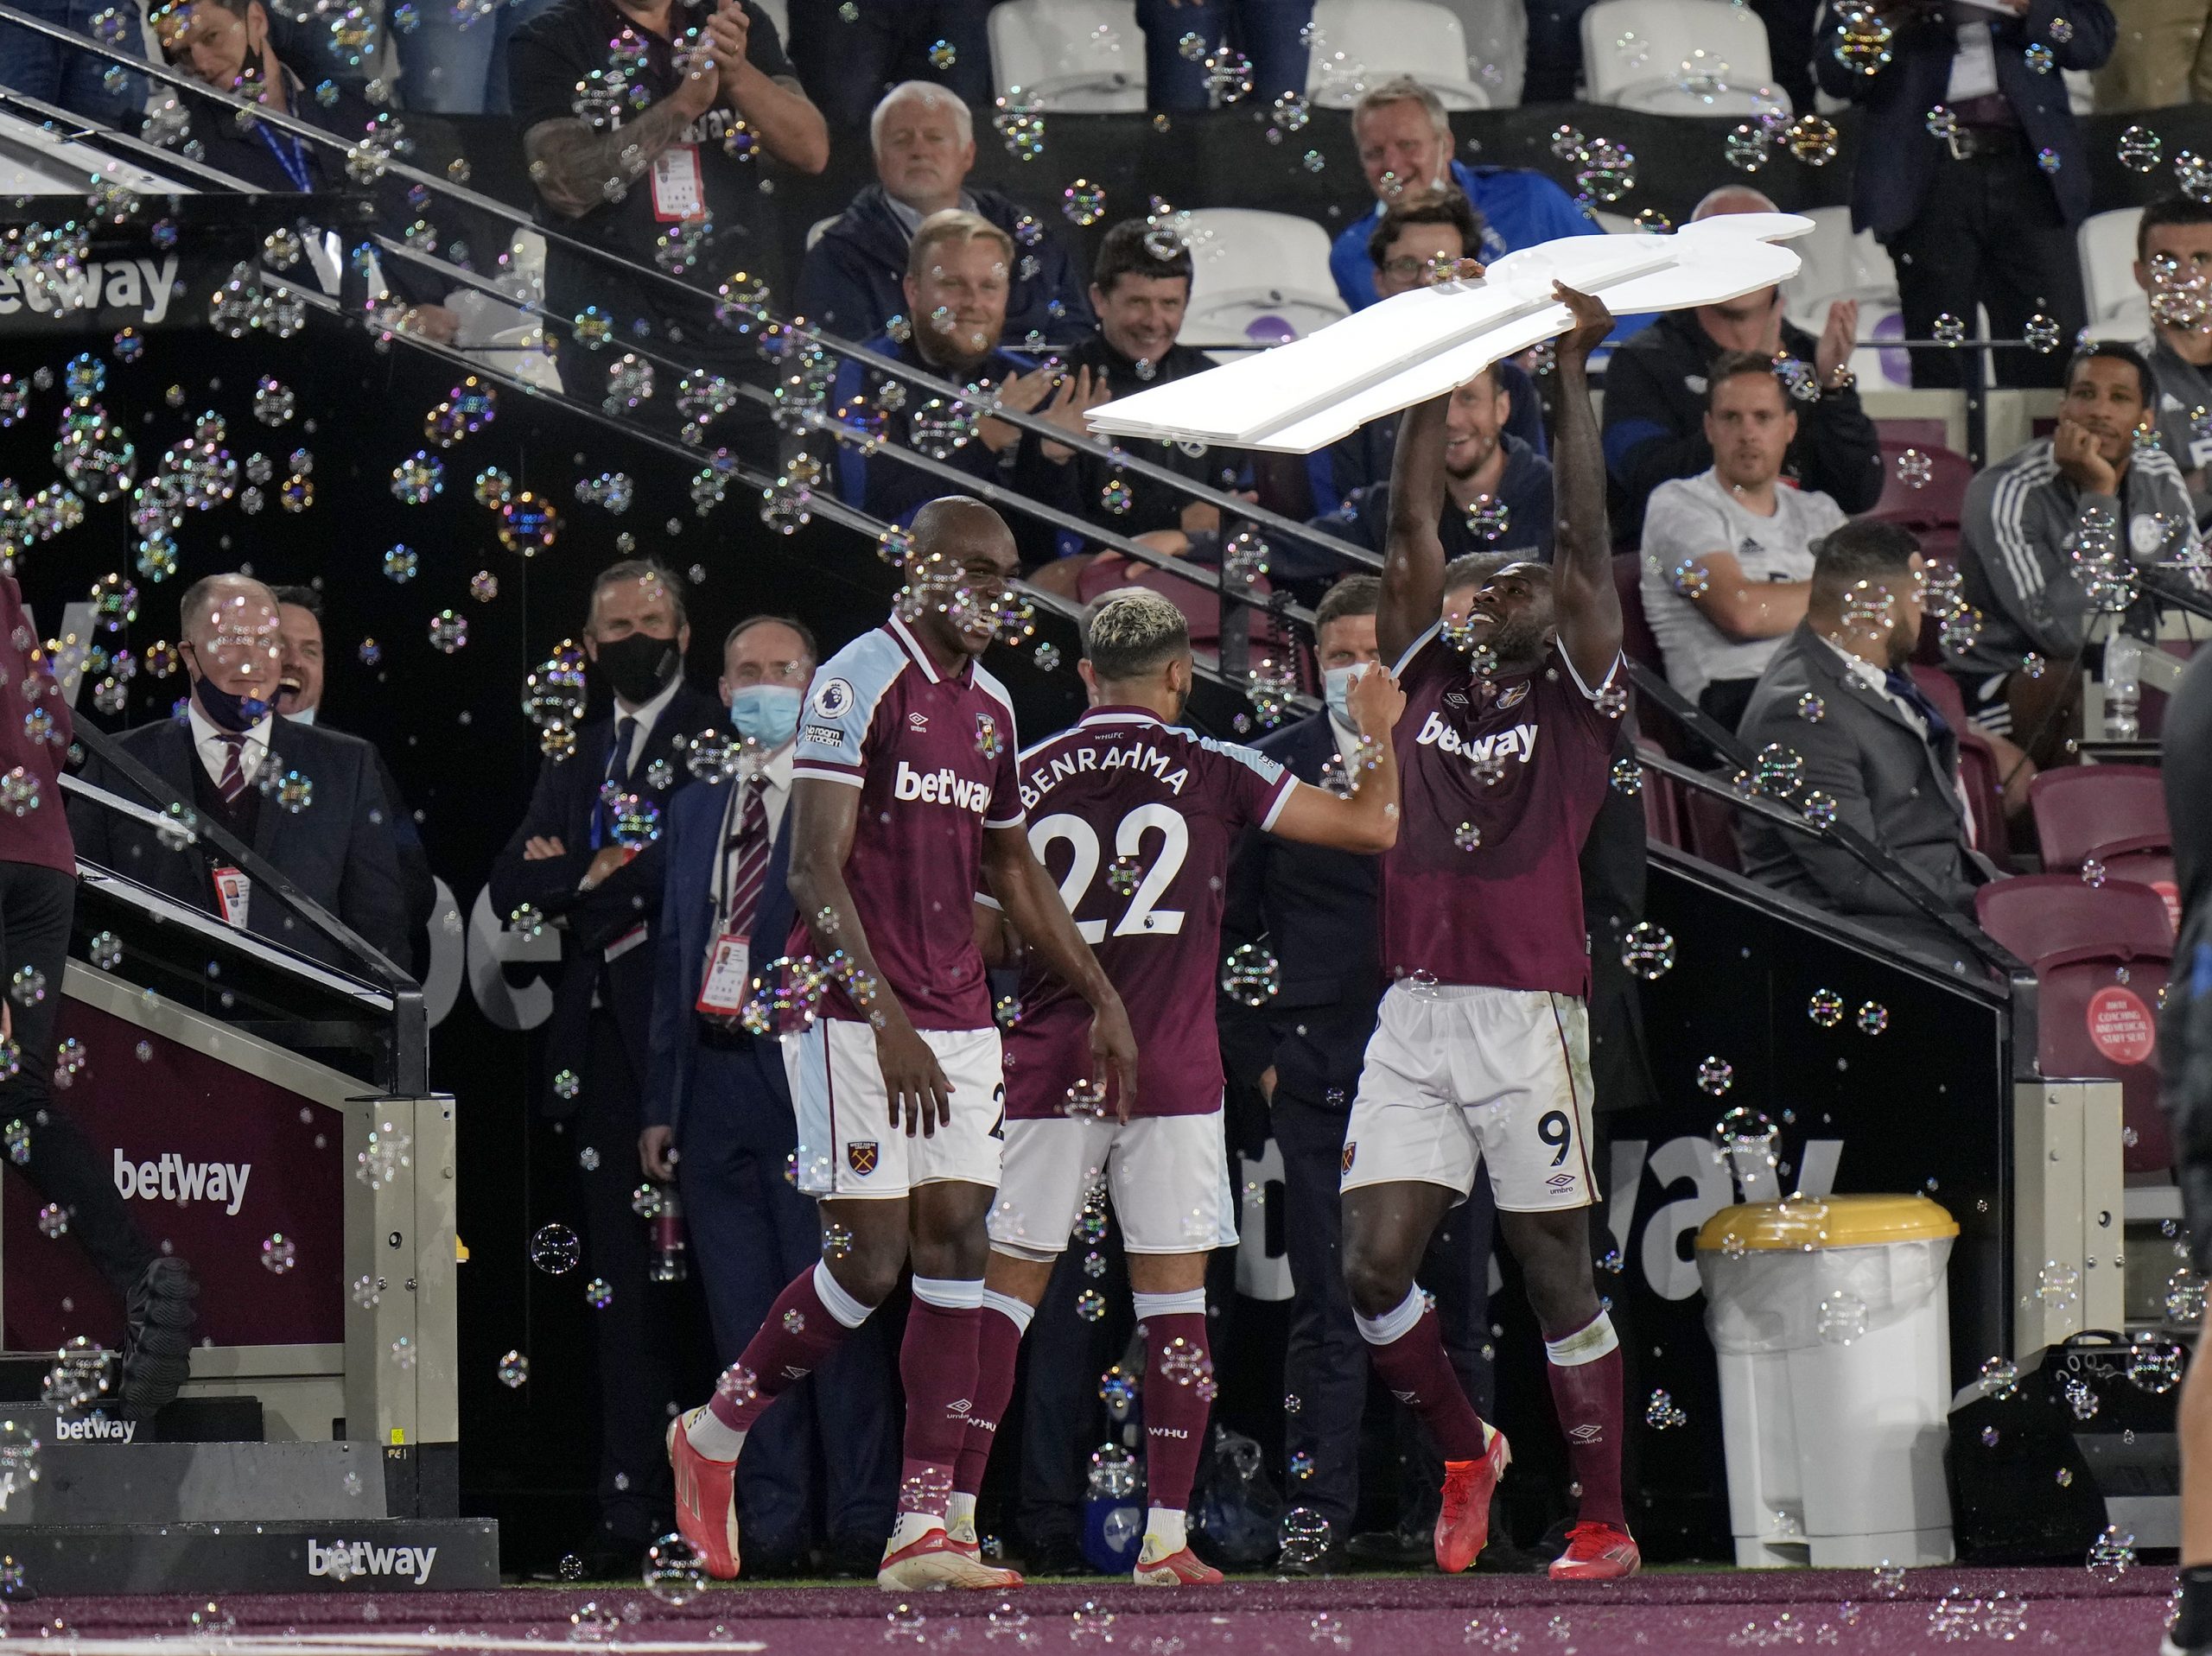 West Ham's Michail Antonio, right, holds aloft a cardboard cutout of himself as he celebrates after scoring his side's third goal during the English Premier League soccer match between West Ham United and Leicester City and at the London Stadium in London, Monday, Aug. 23, 2021. (AP Photo/Alastair Grant)